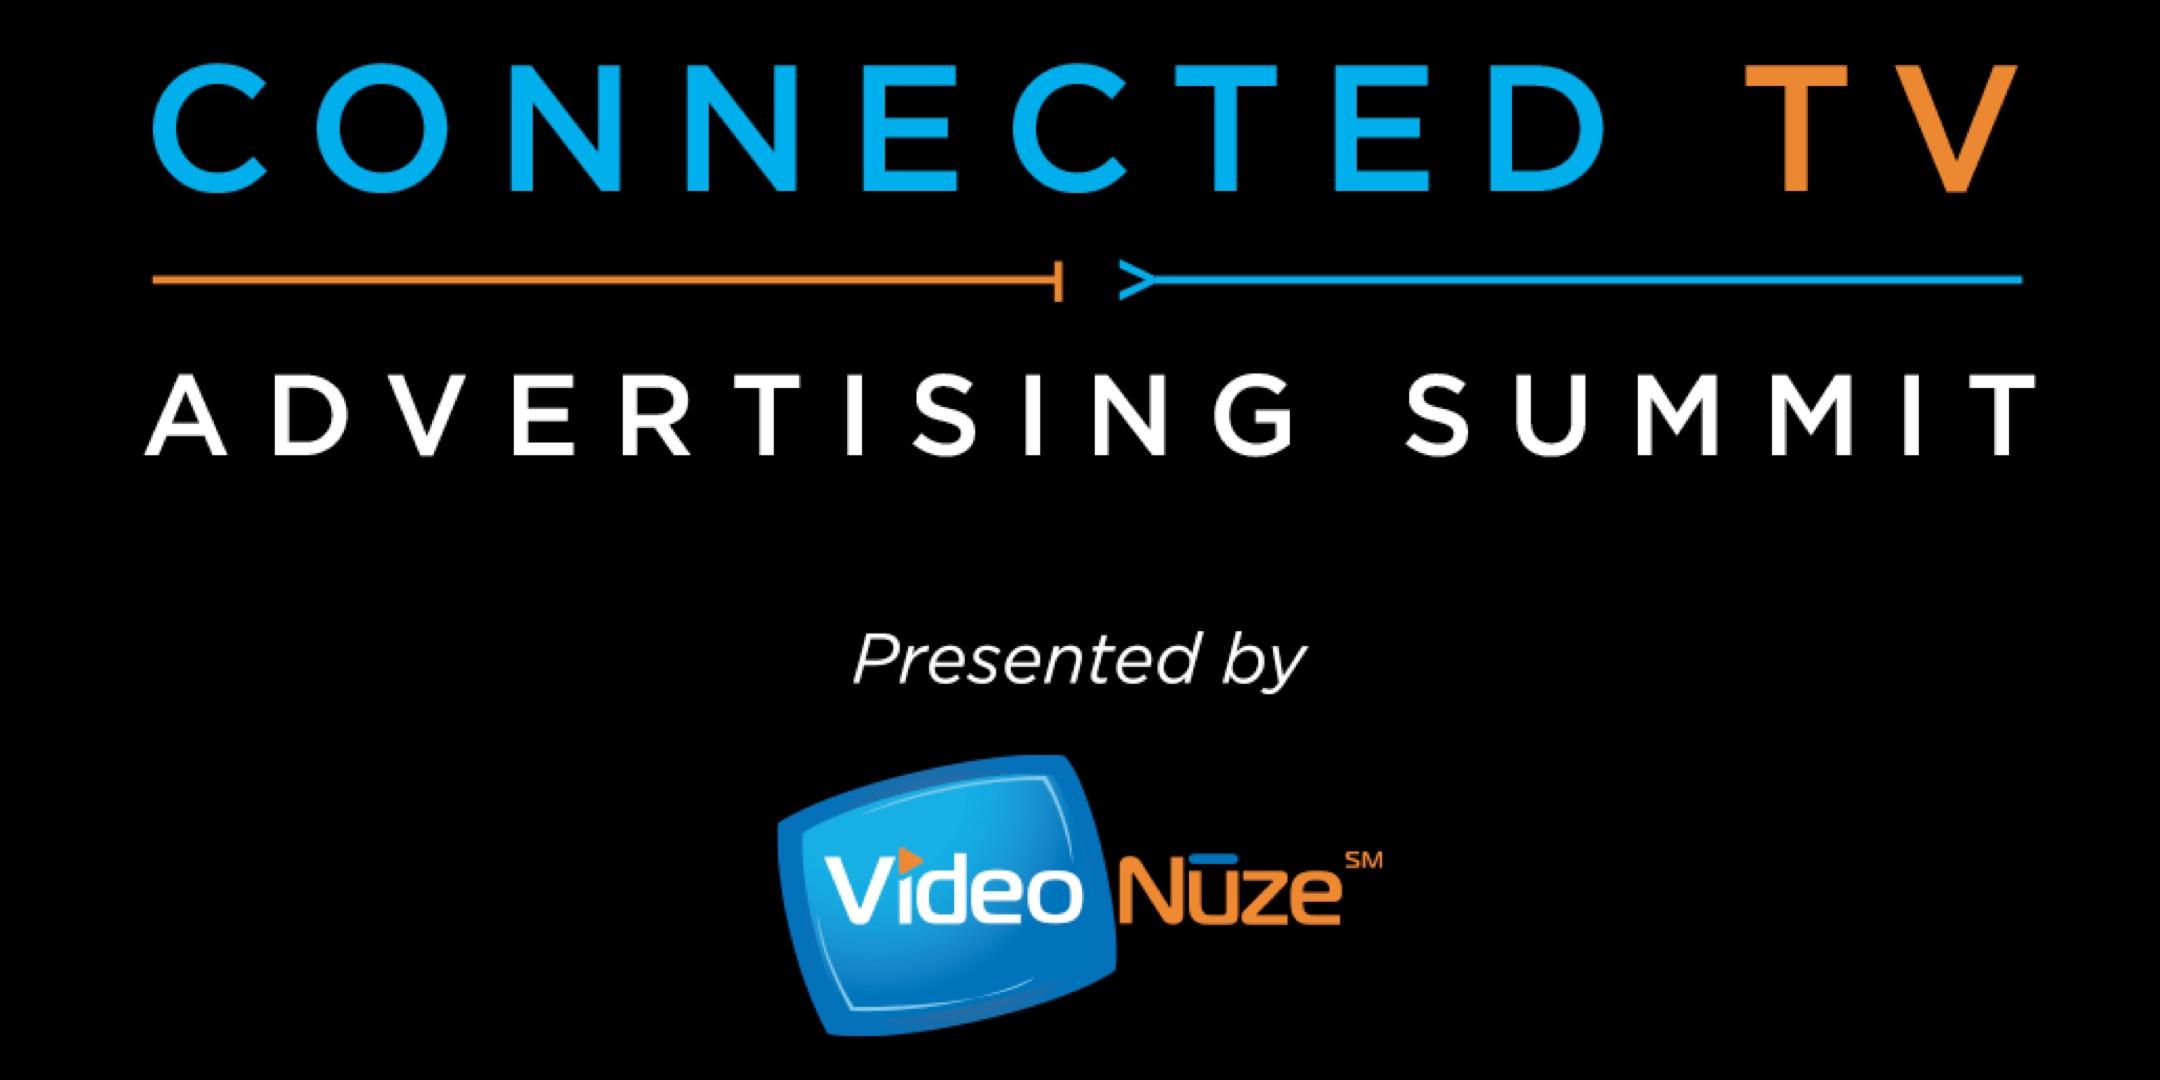 Connected TV Advertising Summit September 22, 2020